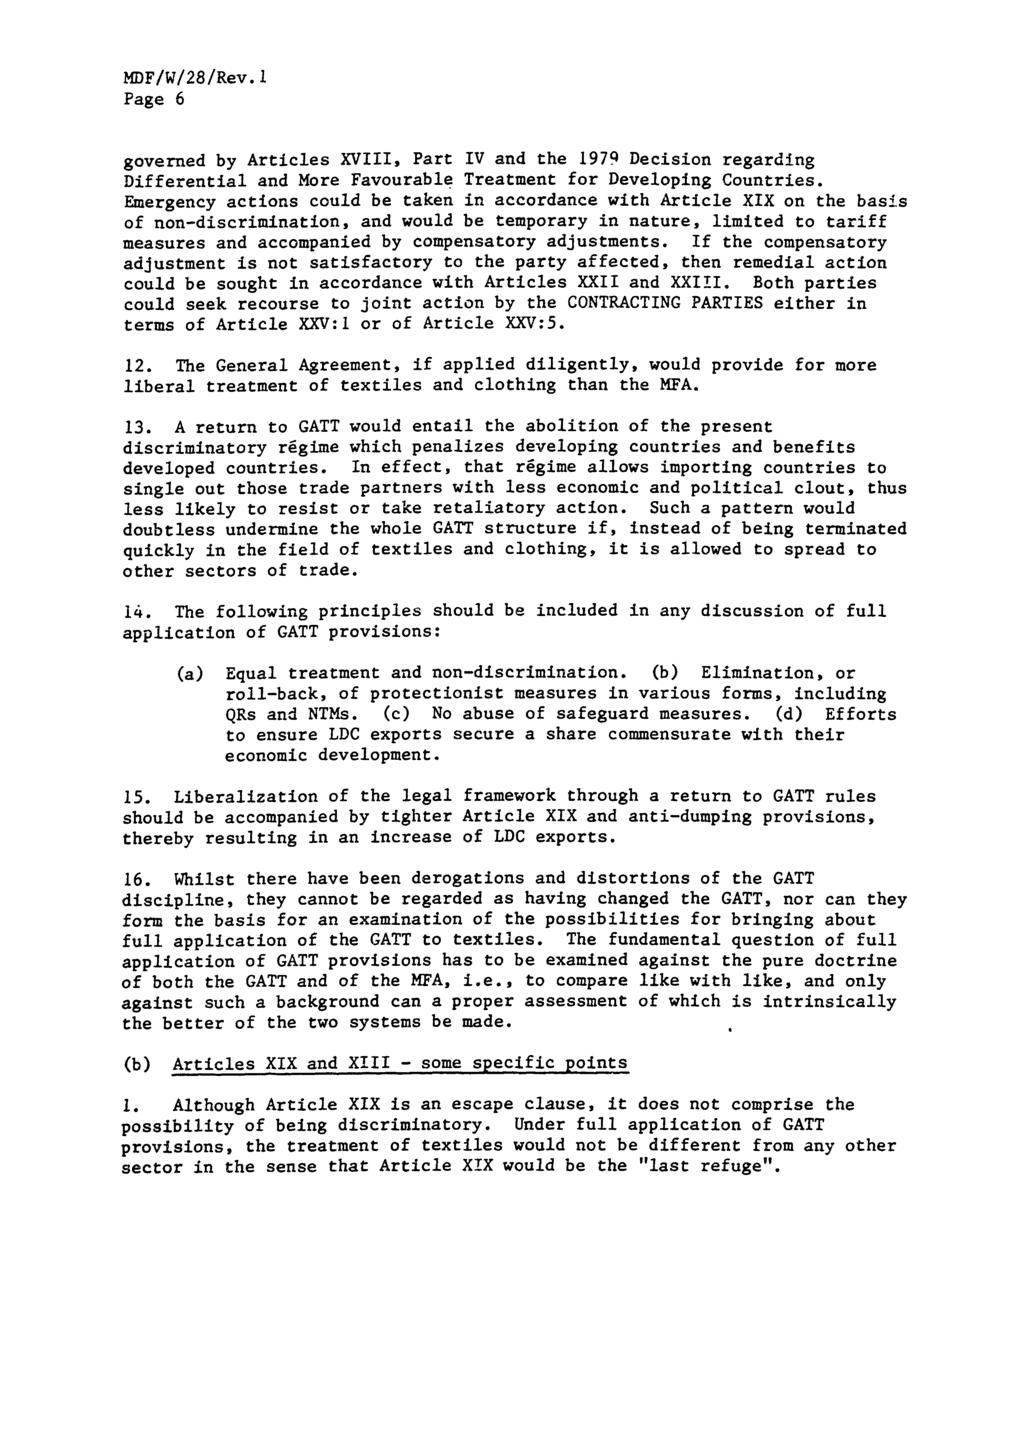 Page 6 governed by Articles XVIII, Part IV and the 1979 Decision regarding Differential and More Favourable Treatment for Developing Countries.